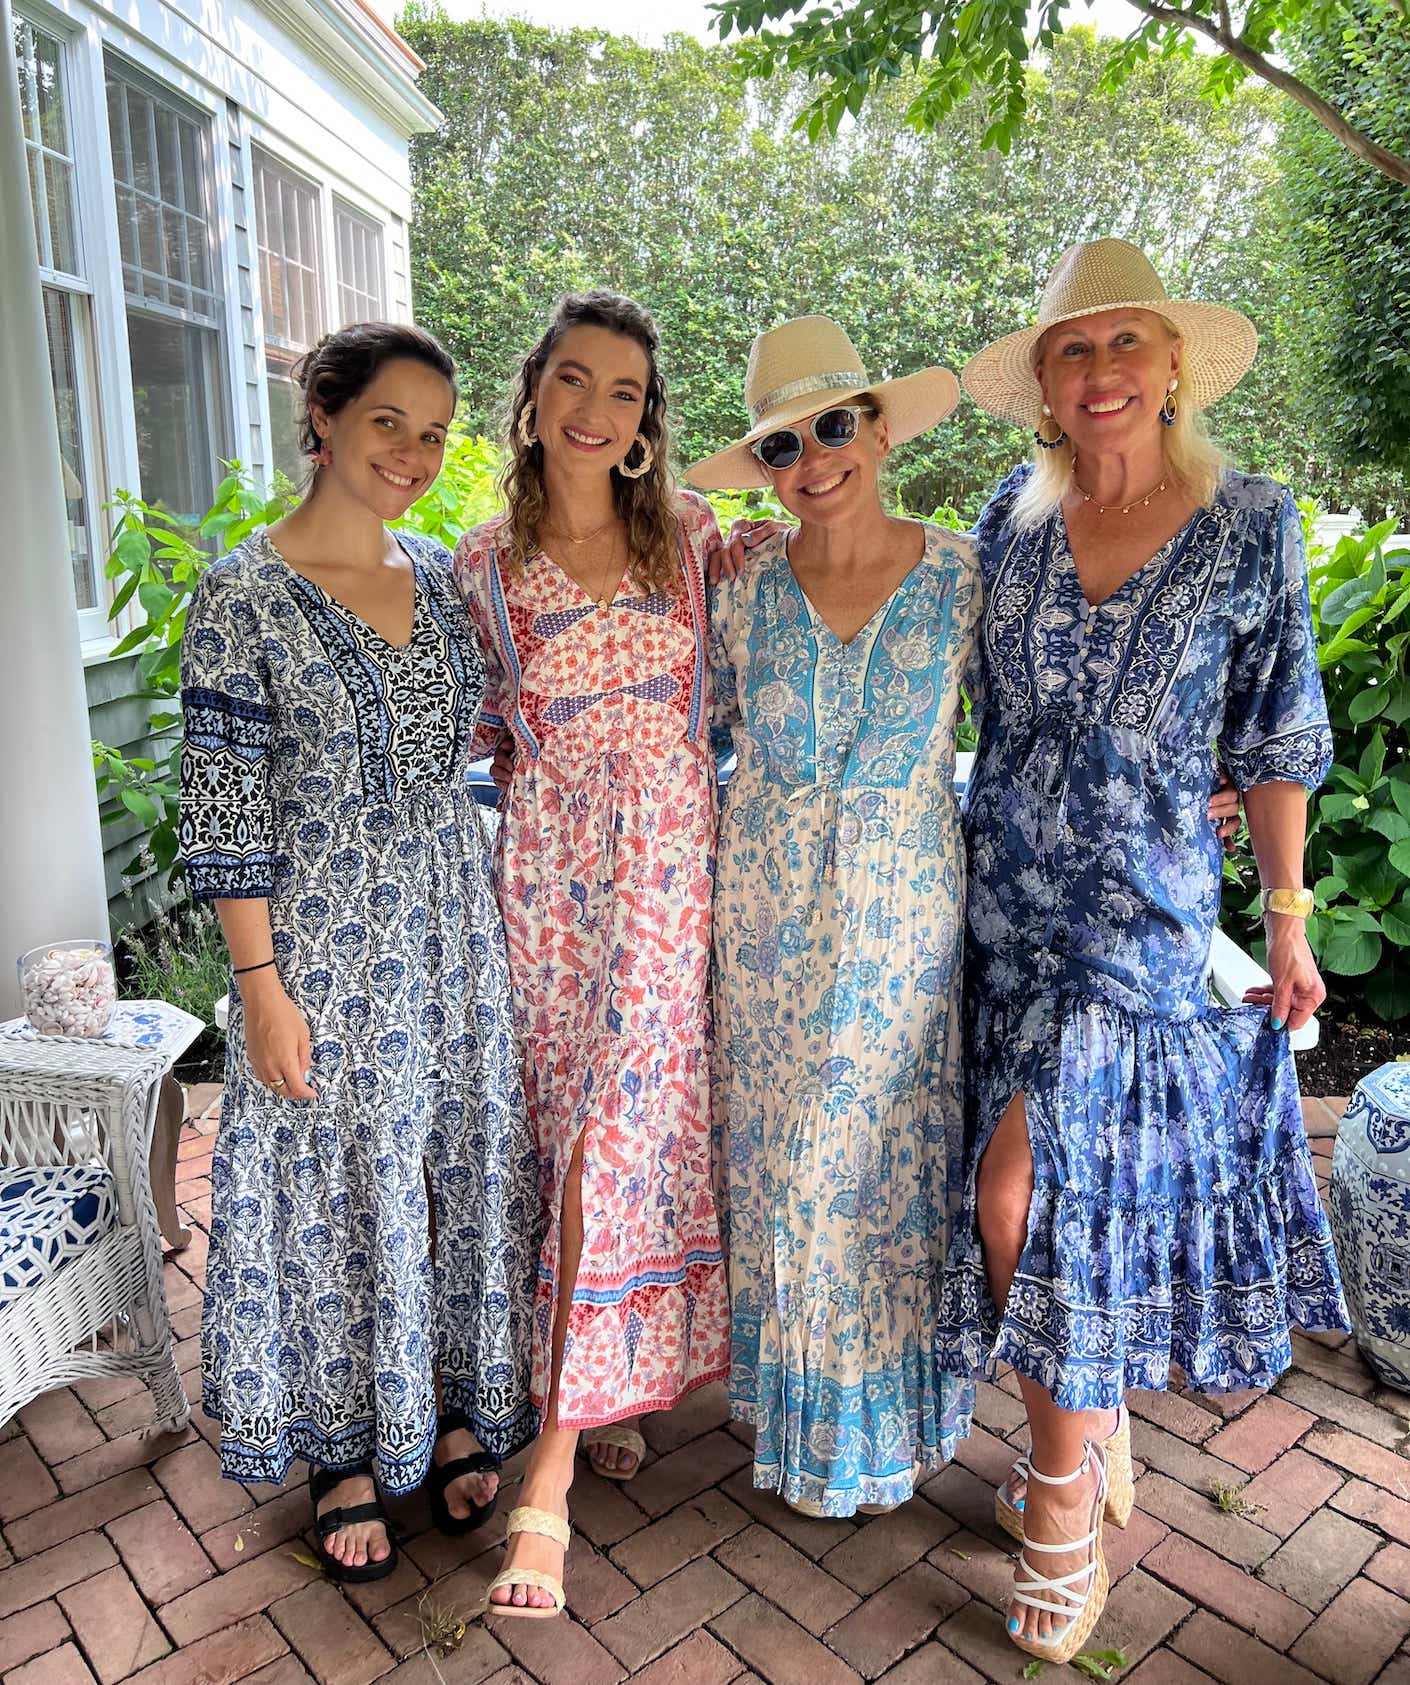 Katie couric and other women wearing Walker and Wade dresses